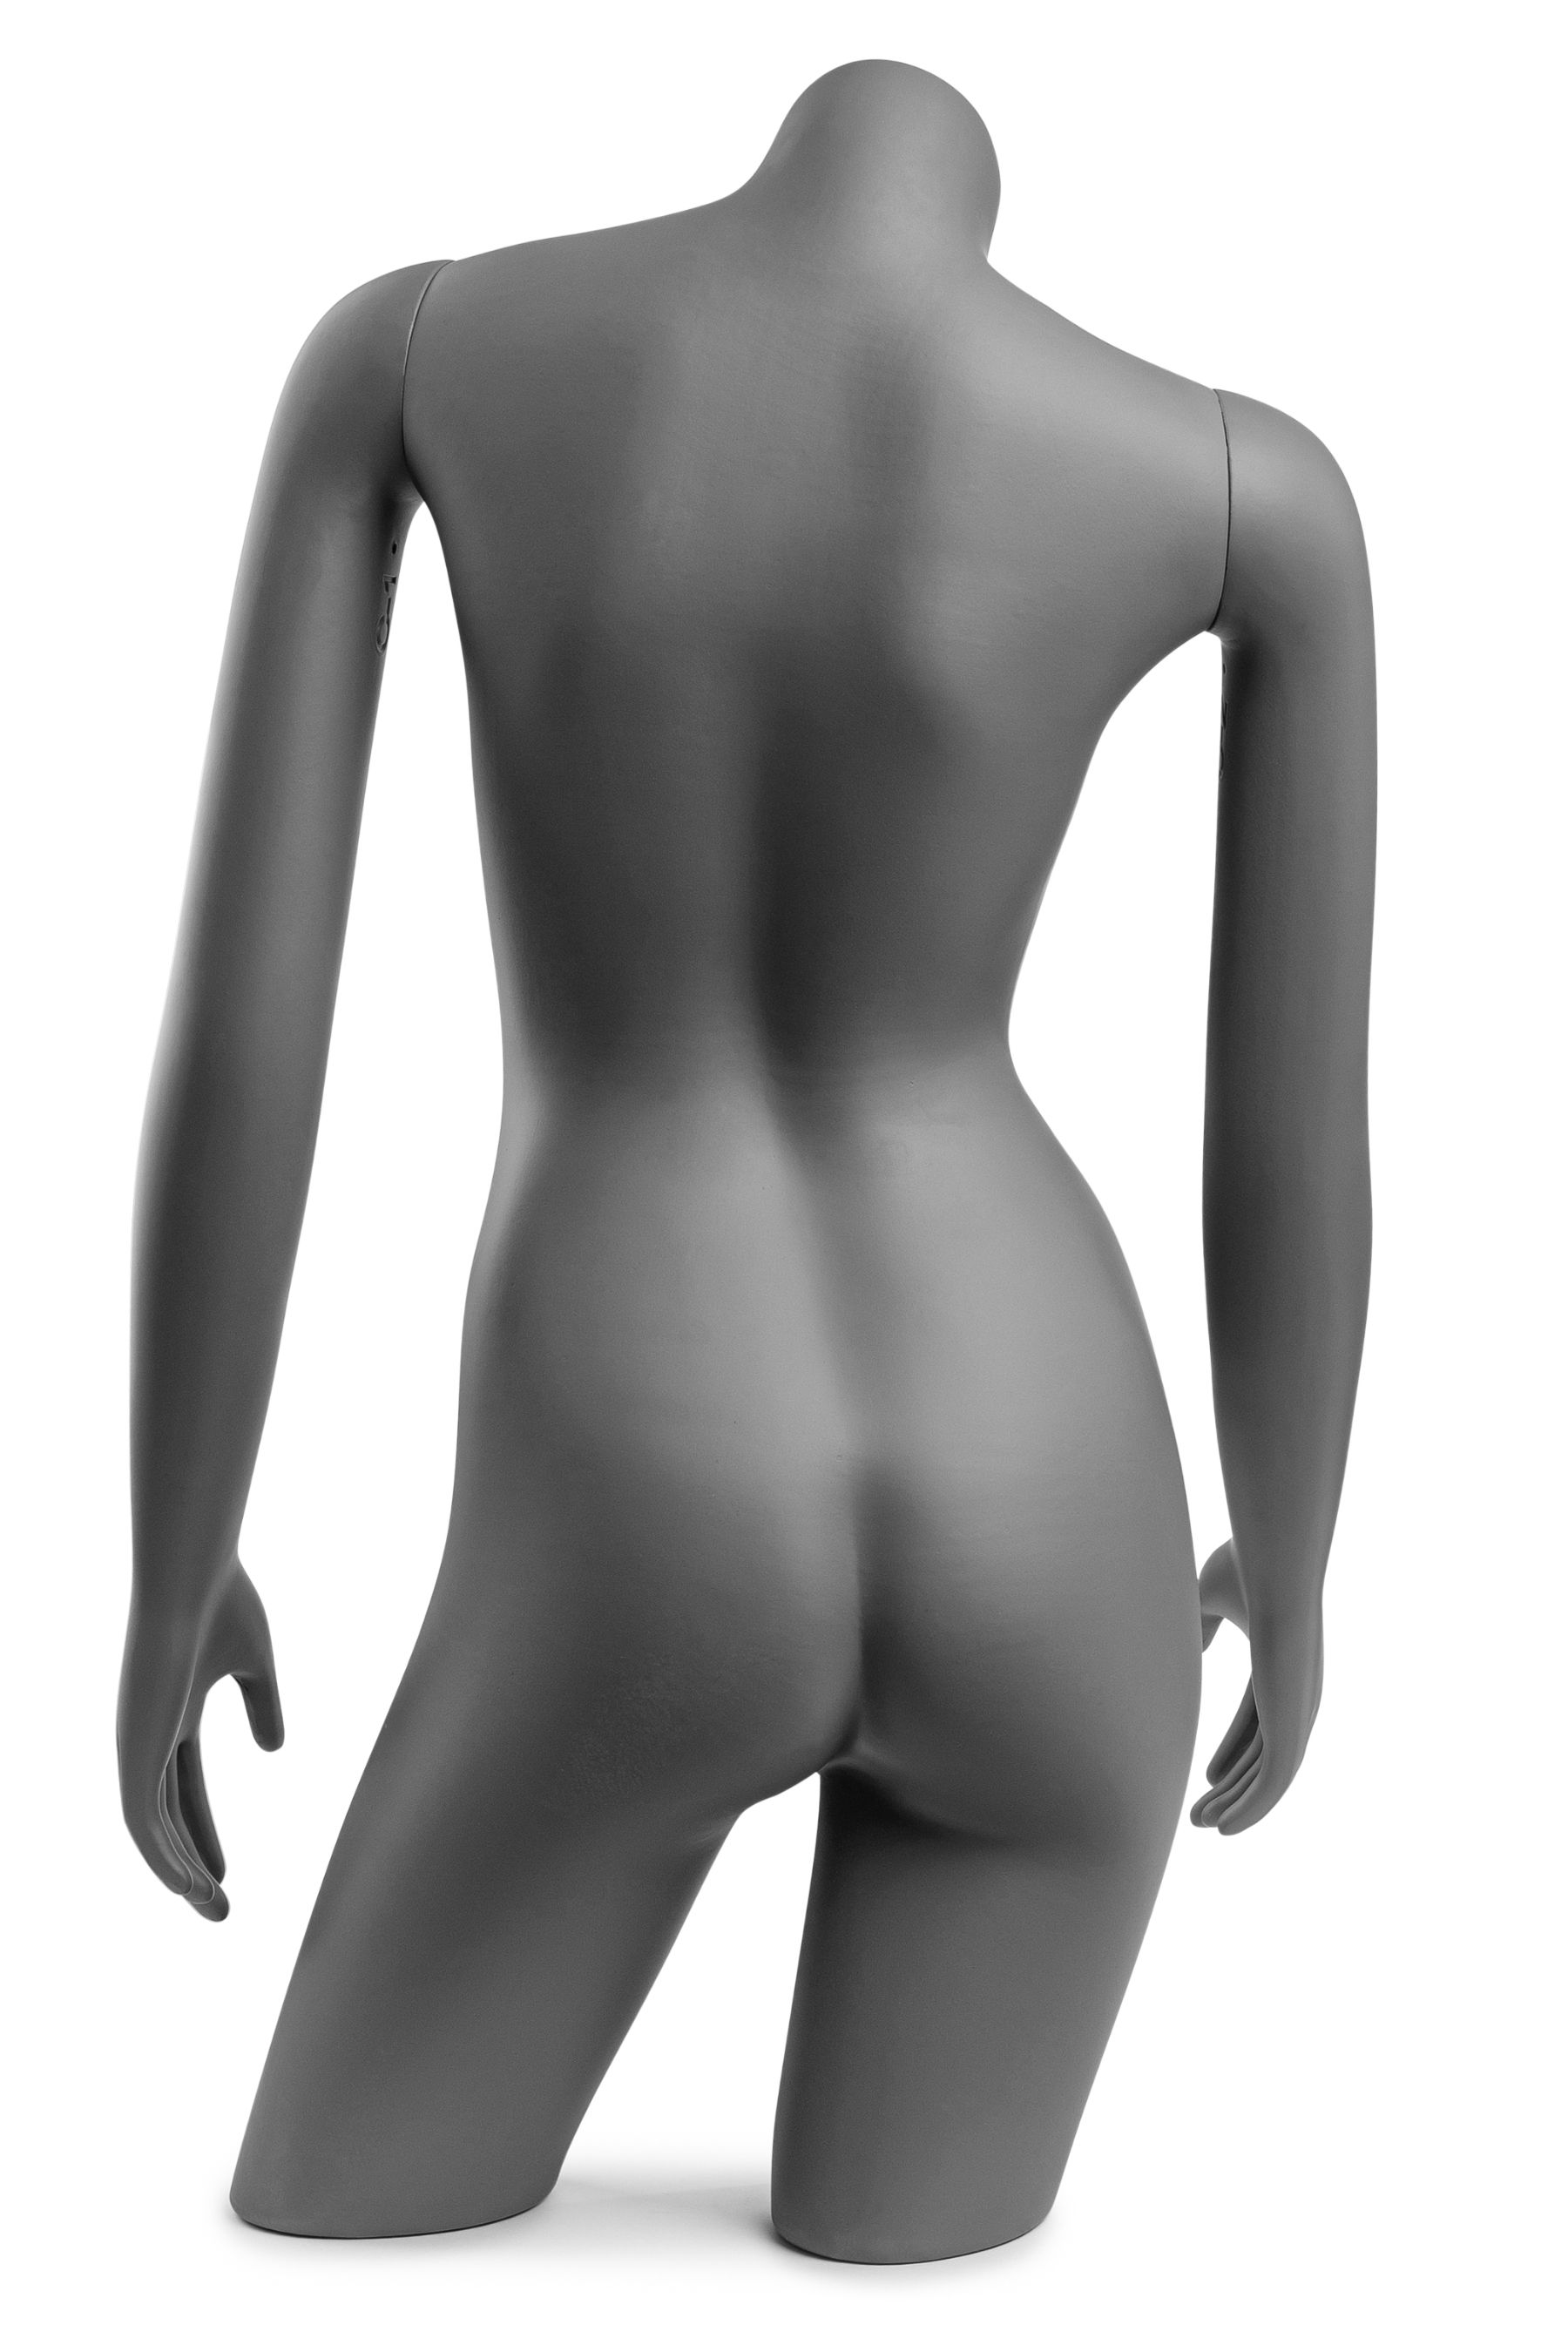 3 Legged Base 28.5" Female Upper Body 3/4 Torso Mannequin with Adjustable Arms 